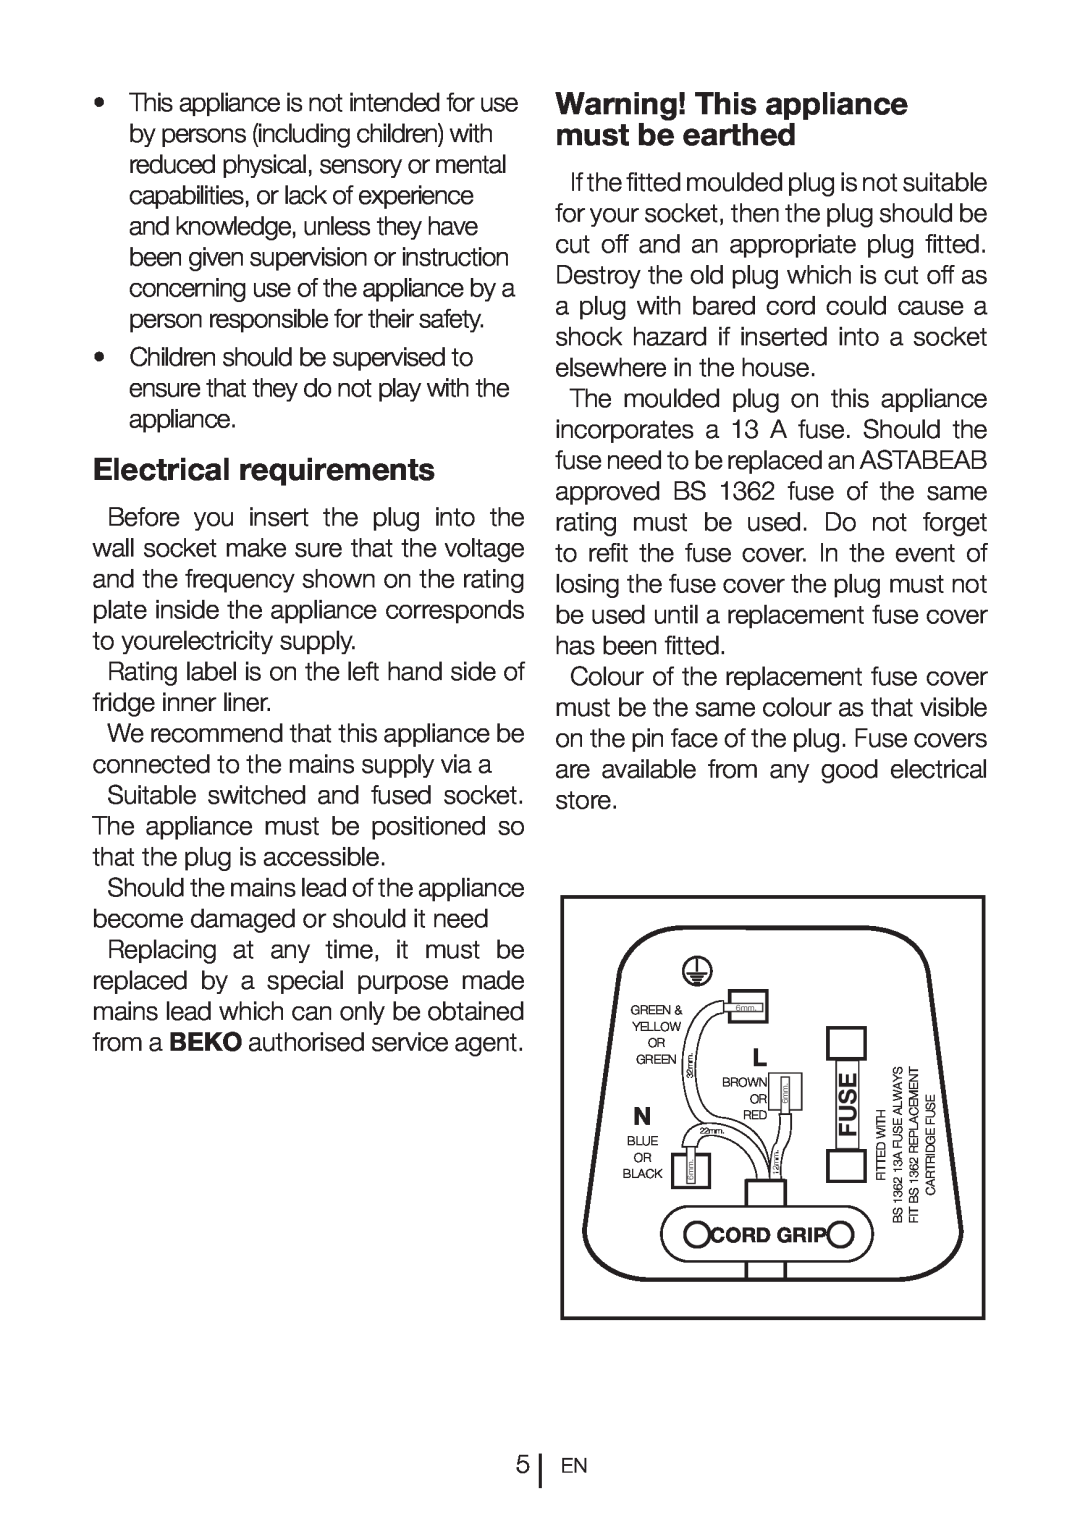 Beko CFF6873GX manual Electrical requirements, Warning! This appliance must be earthed, Fuse 